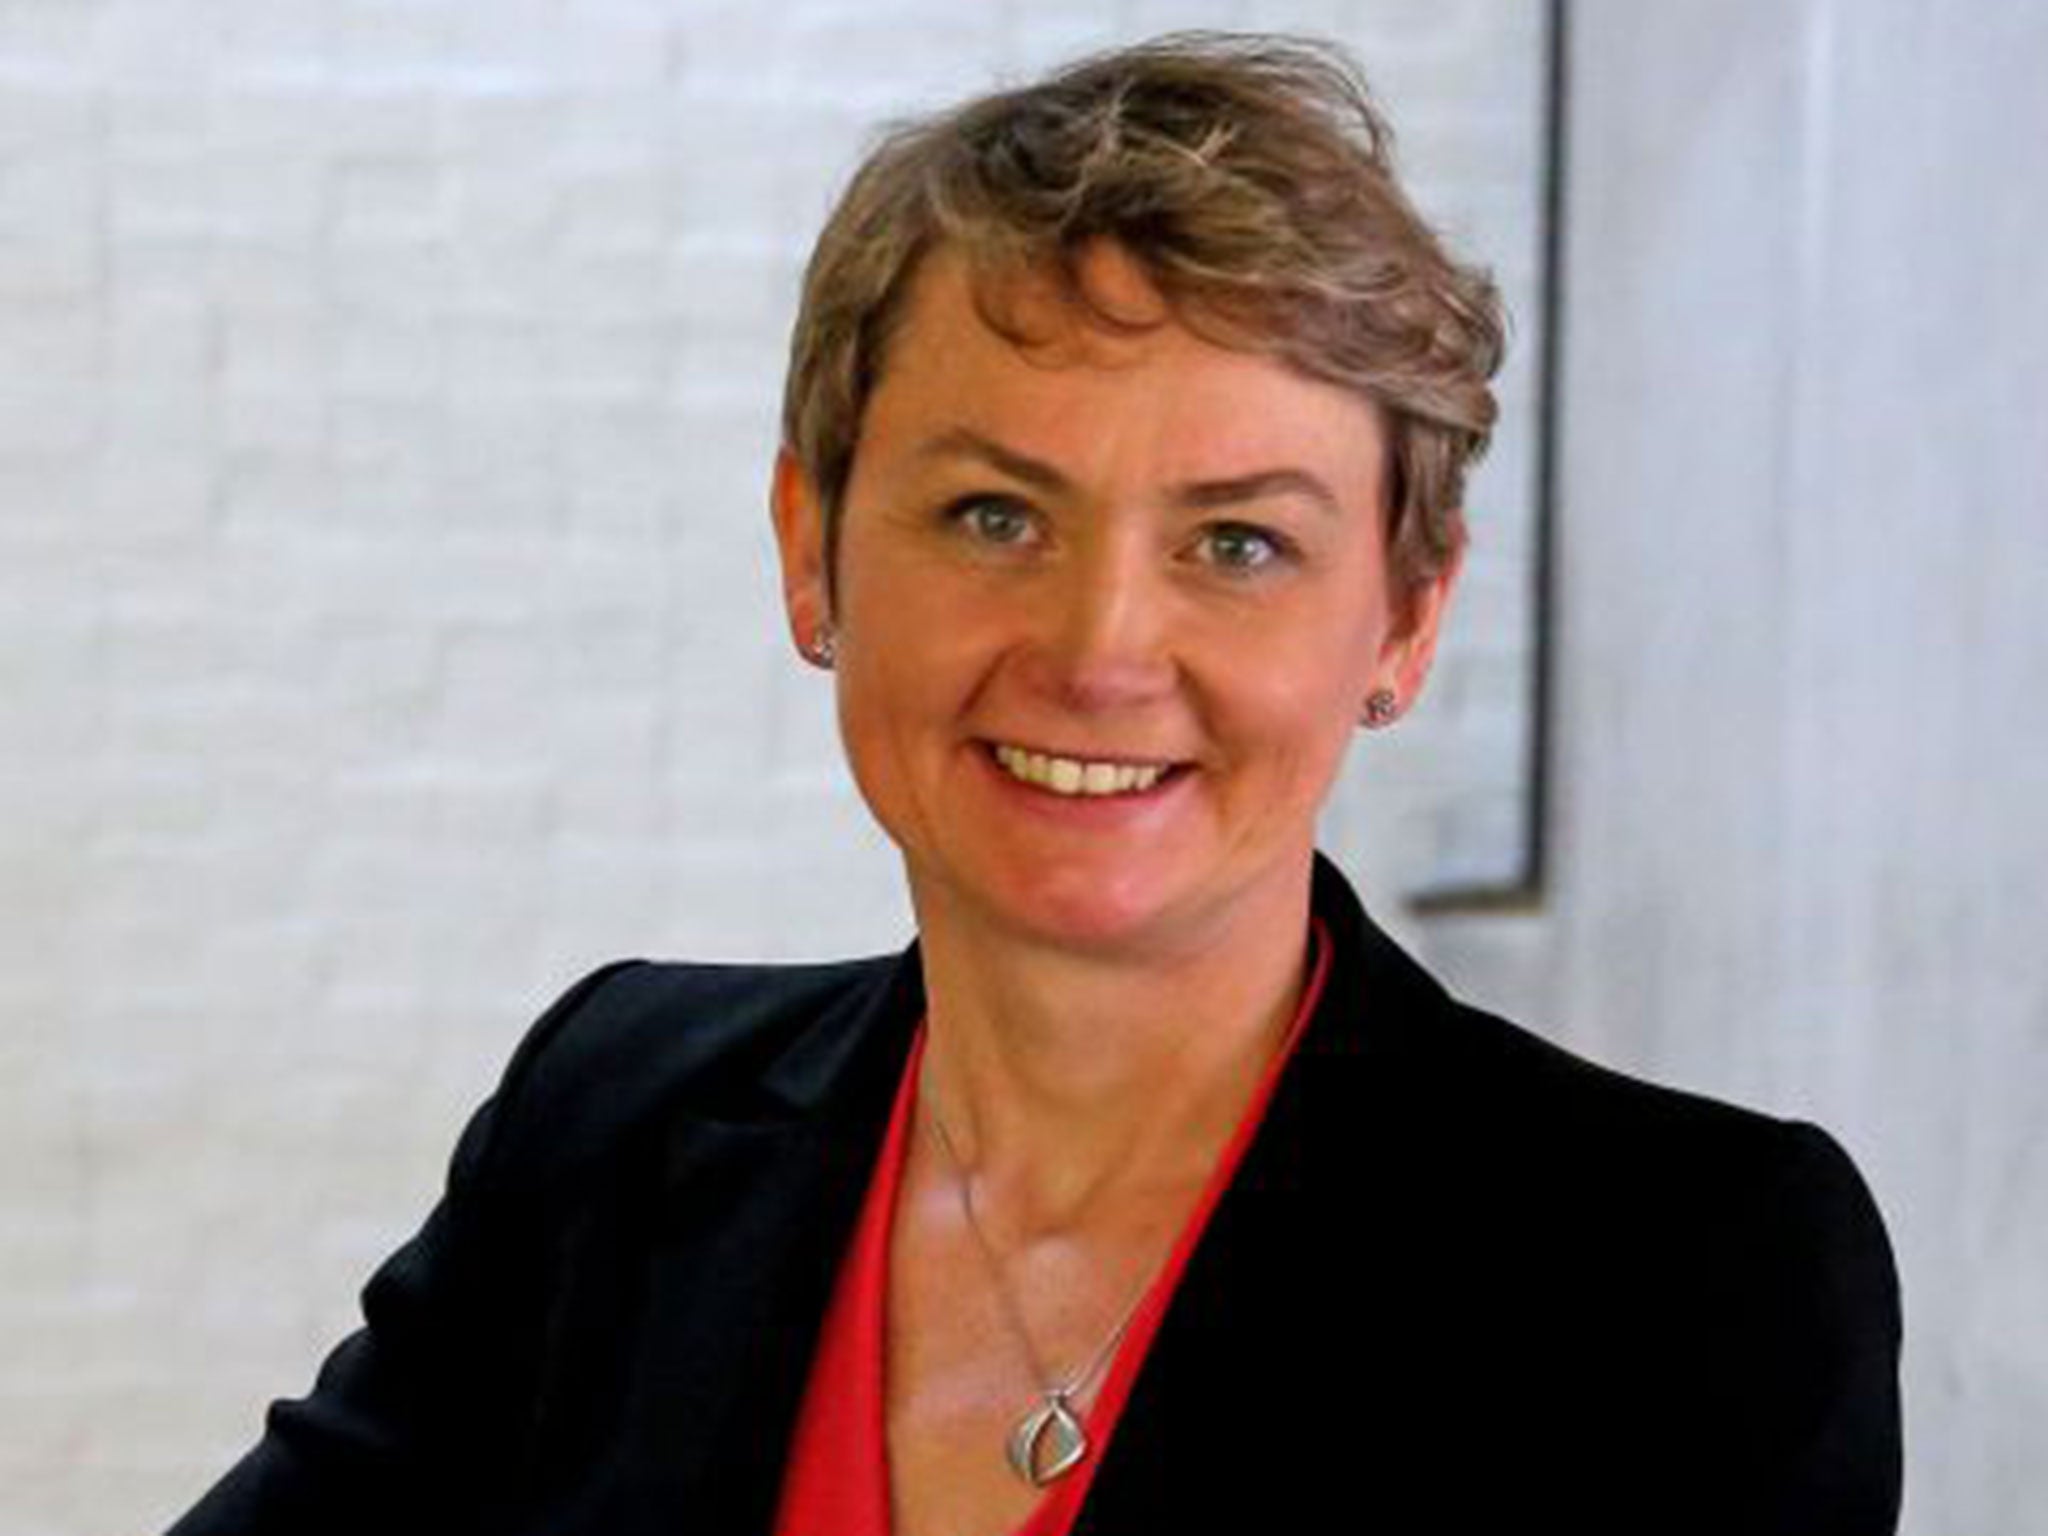 Yvette Cooper will say the Labour party is failing to offer “hope” to workers seeking new opportunities